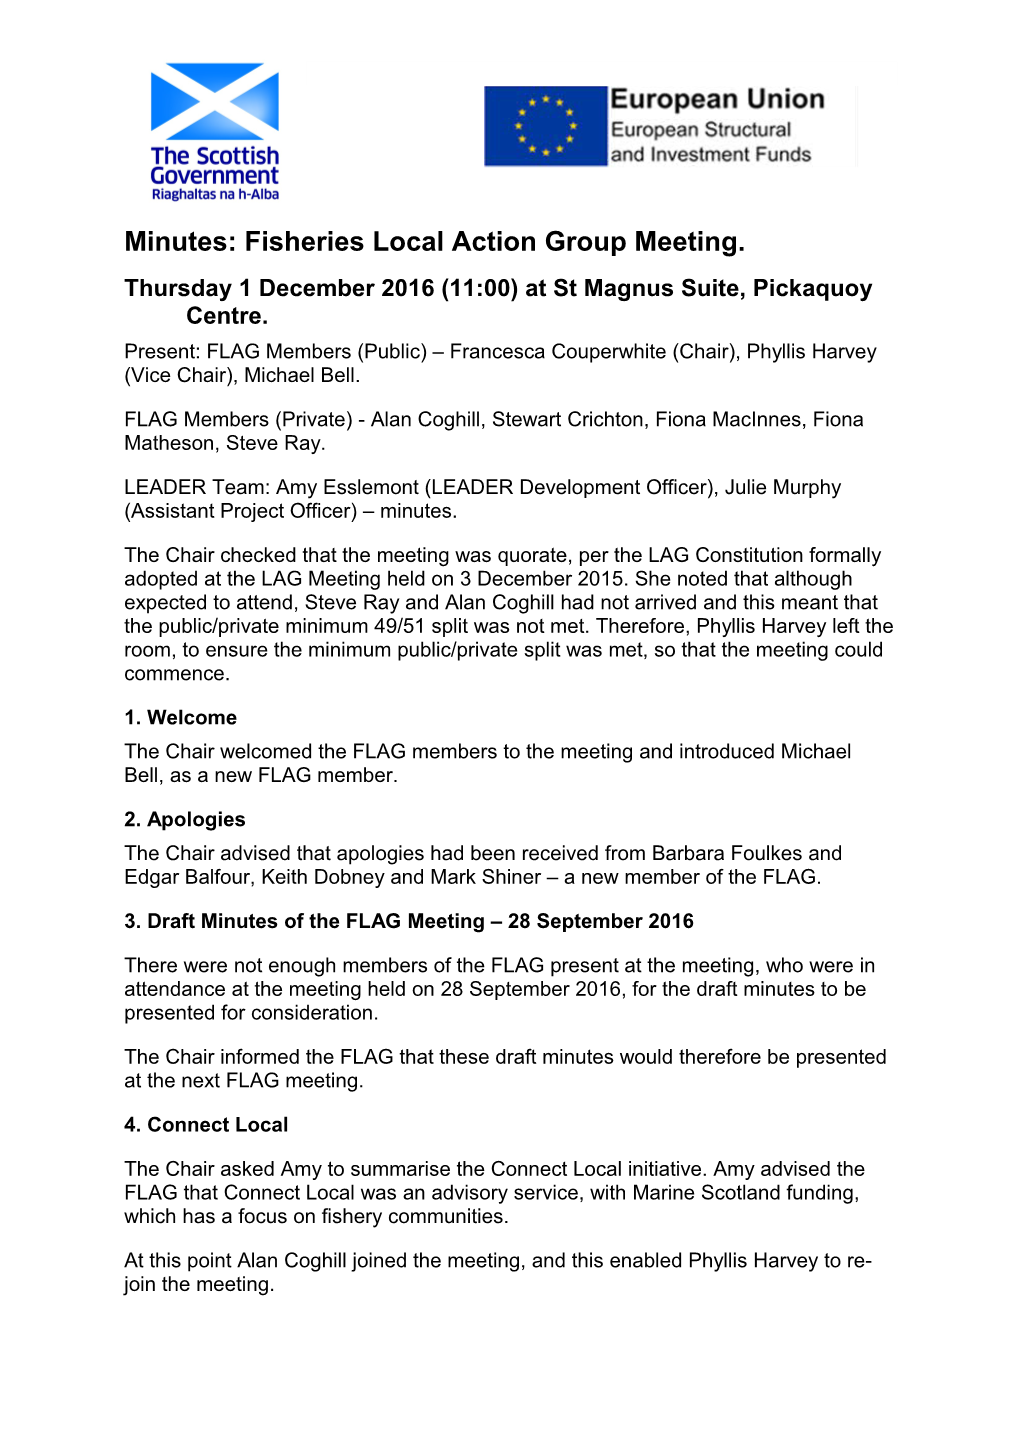 Minutes: Fisheries Local Action Group Meeting